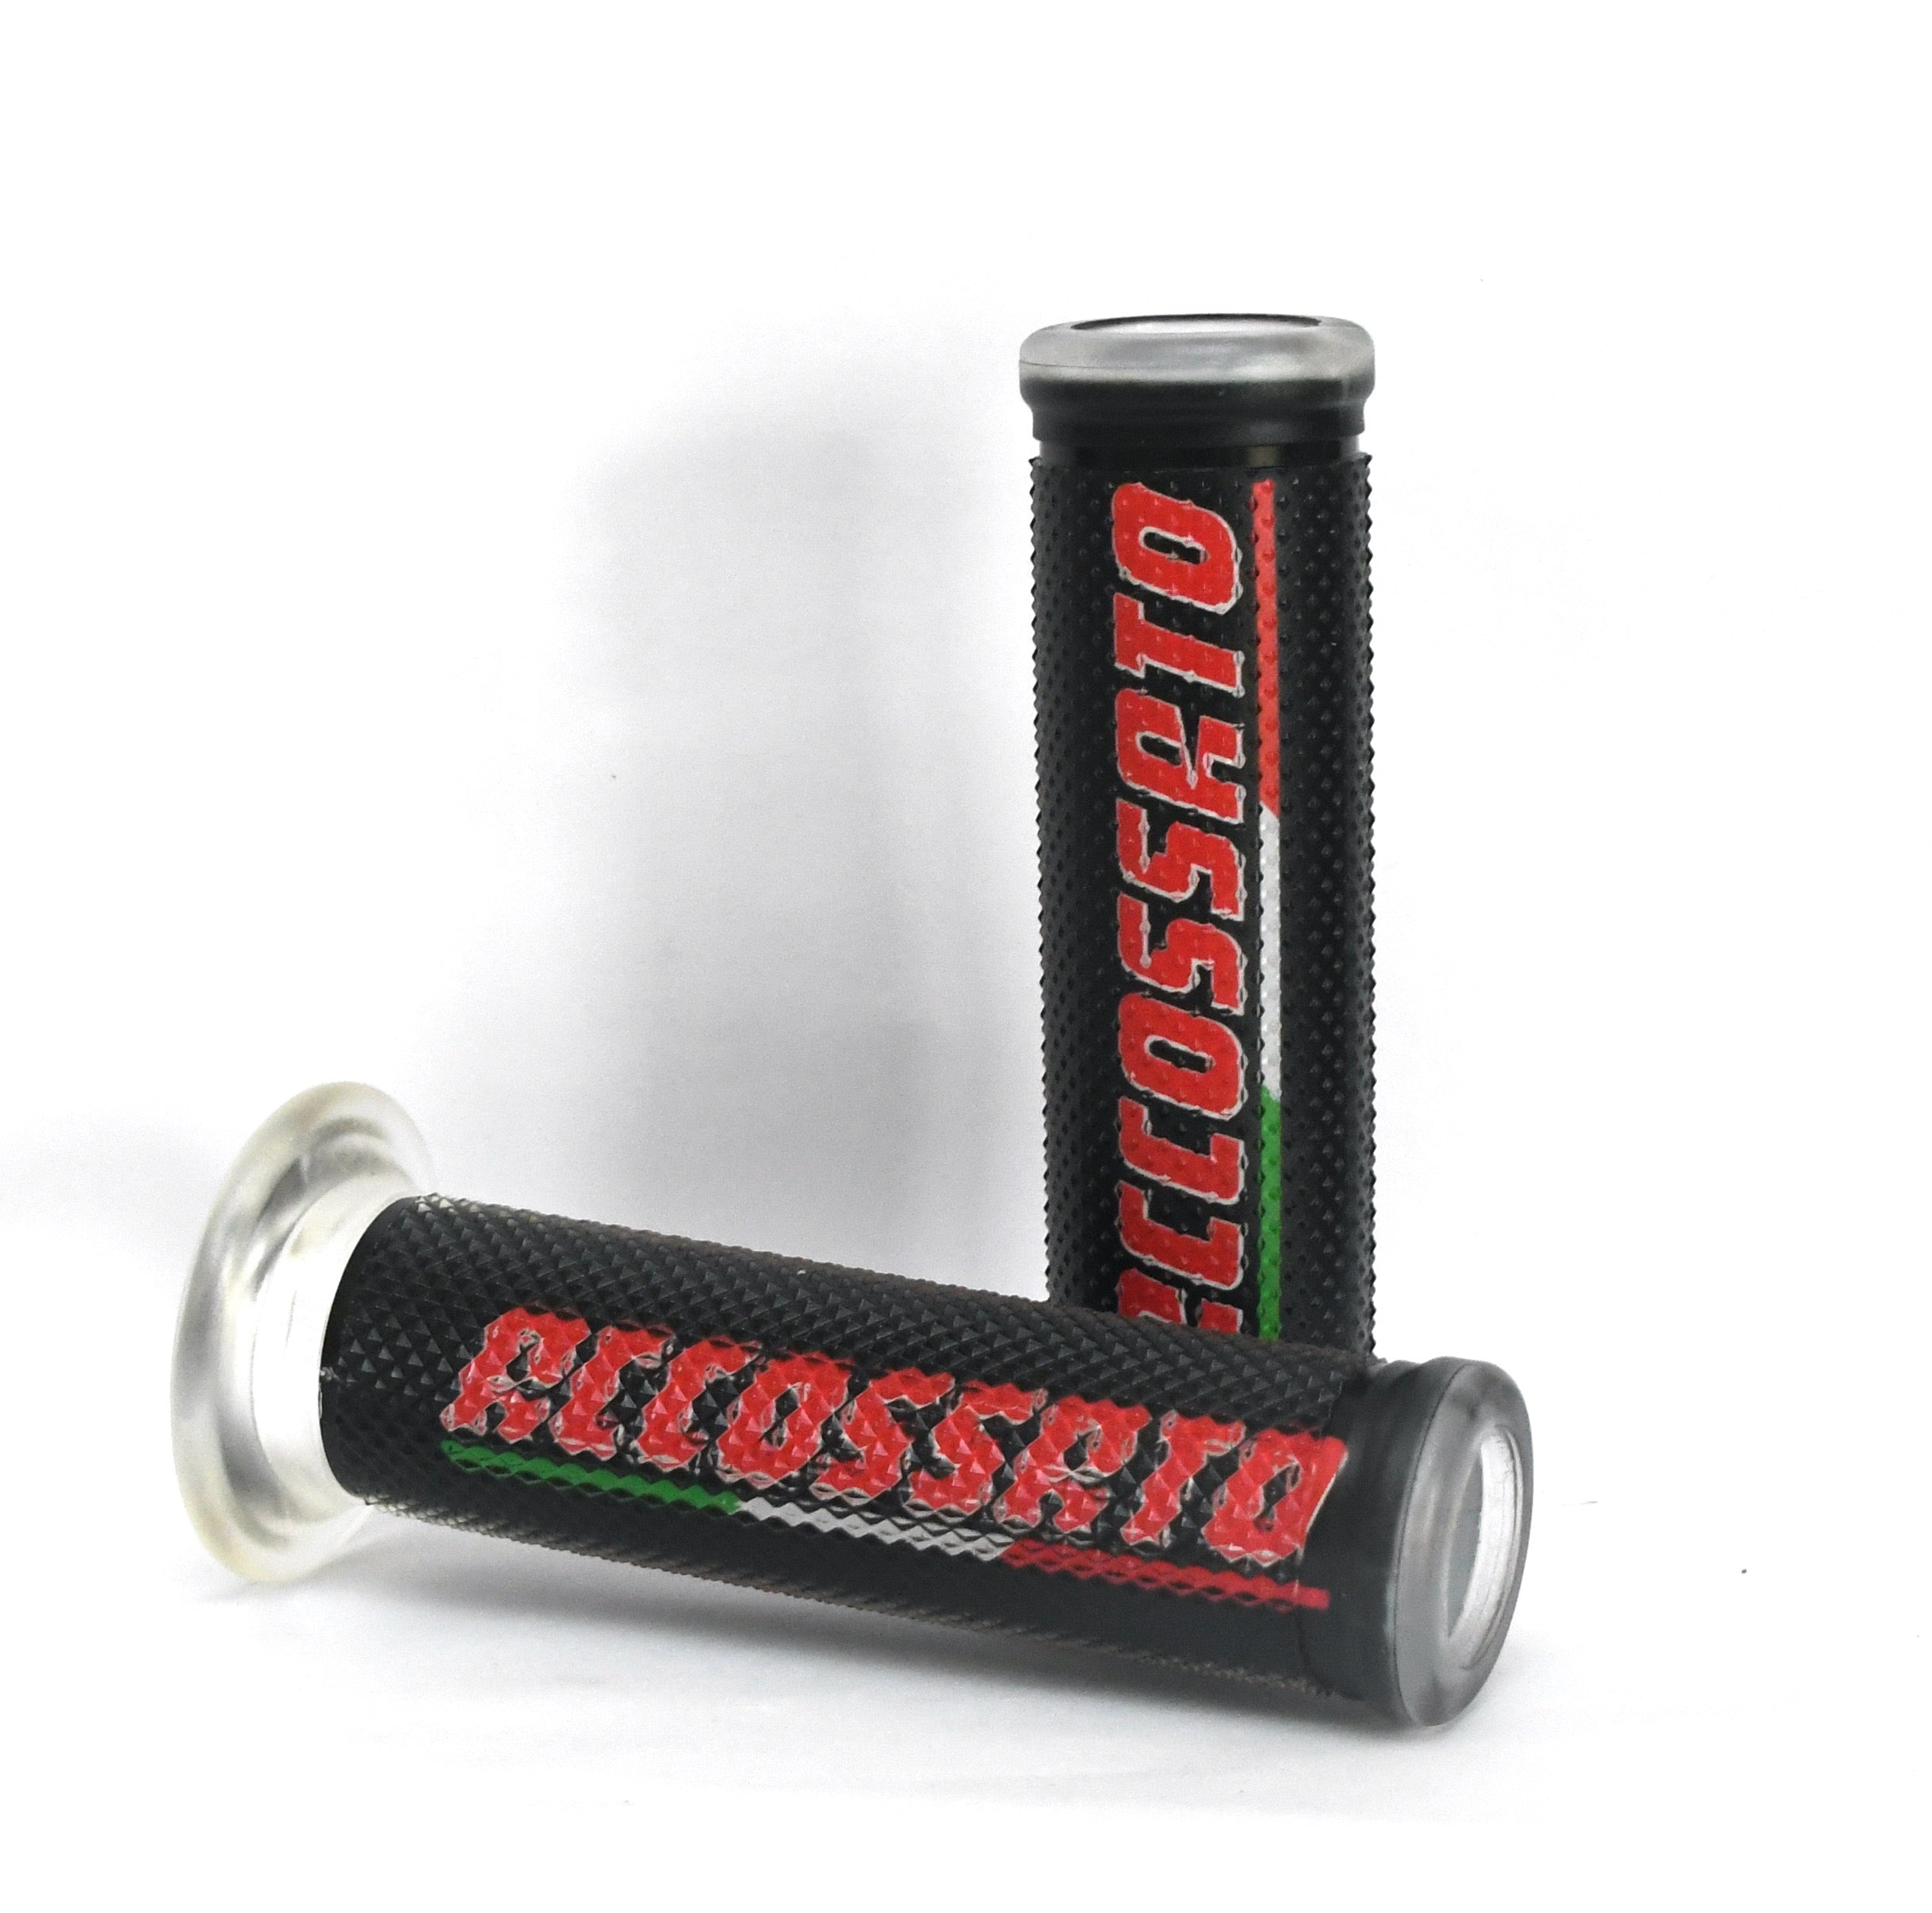 Accossato Racing Grips - Clear with Black and Red grip - GR002 - Open Ended